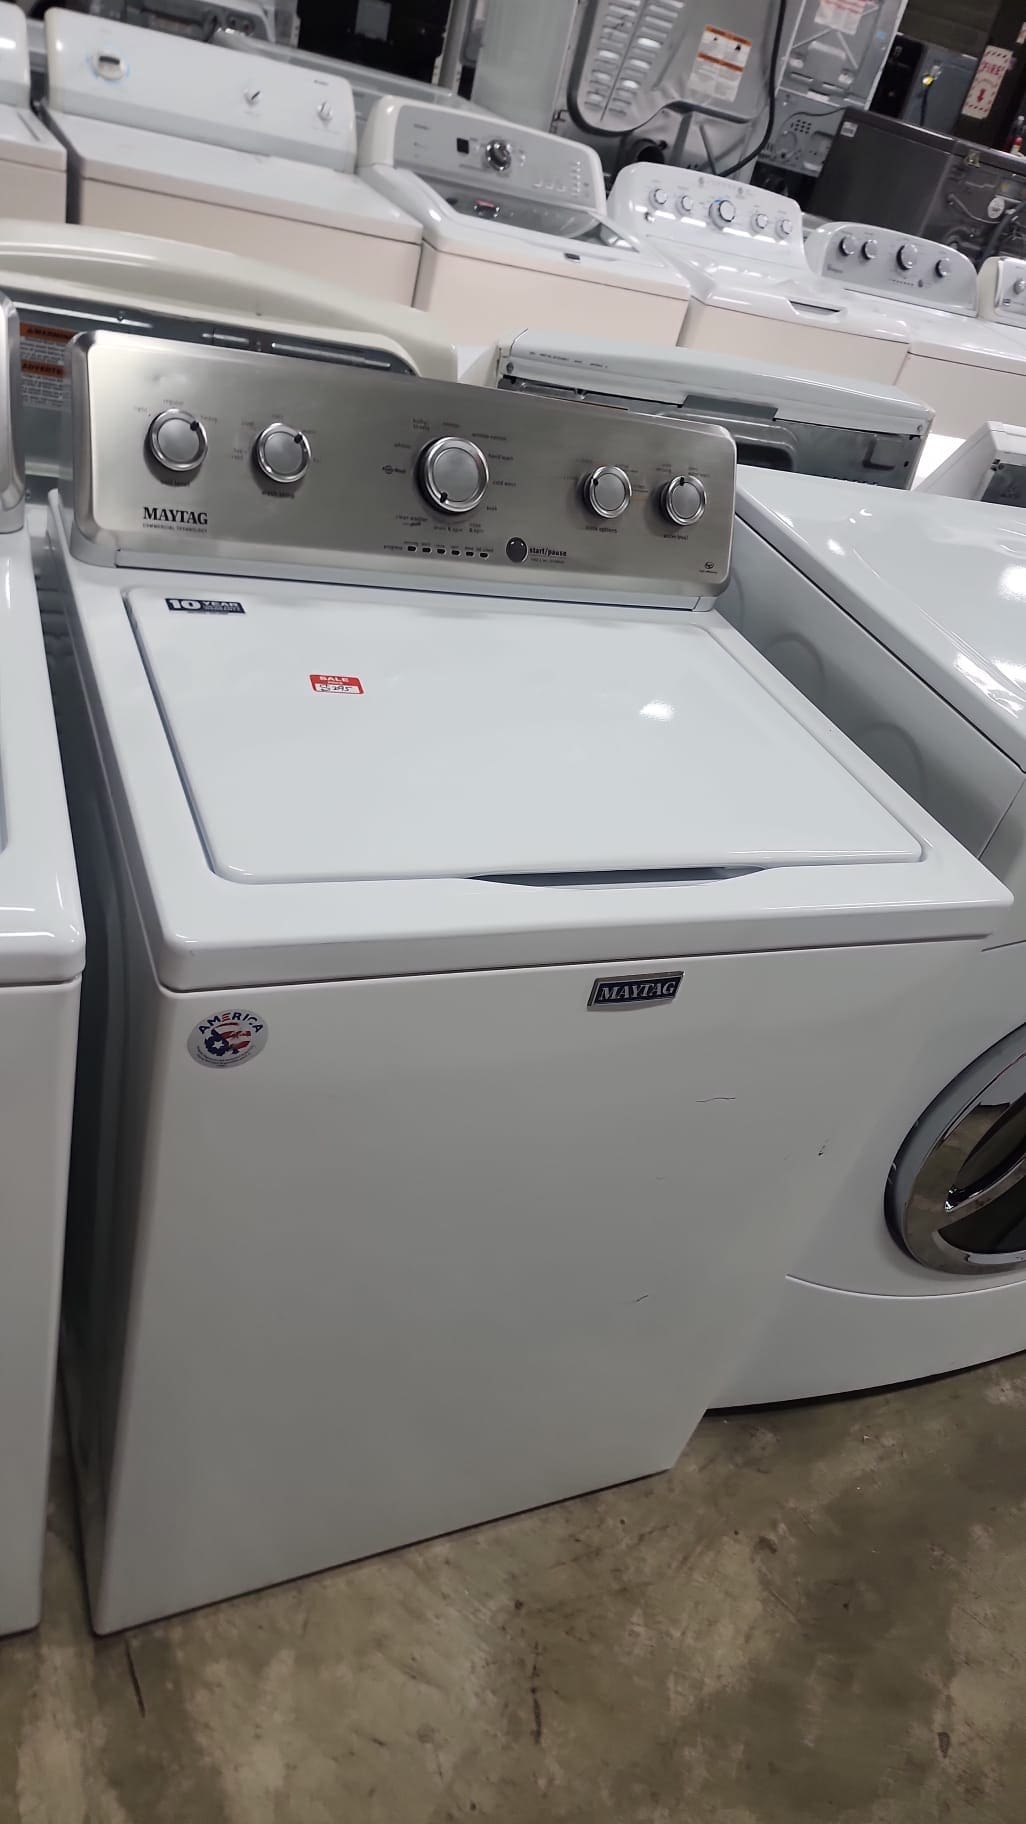 Maytag Top Loading Washer – White